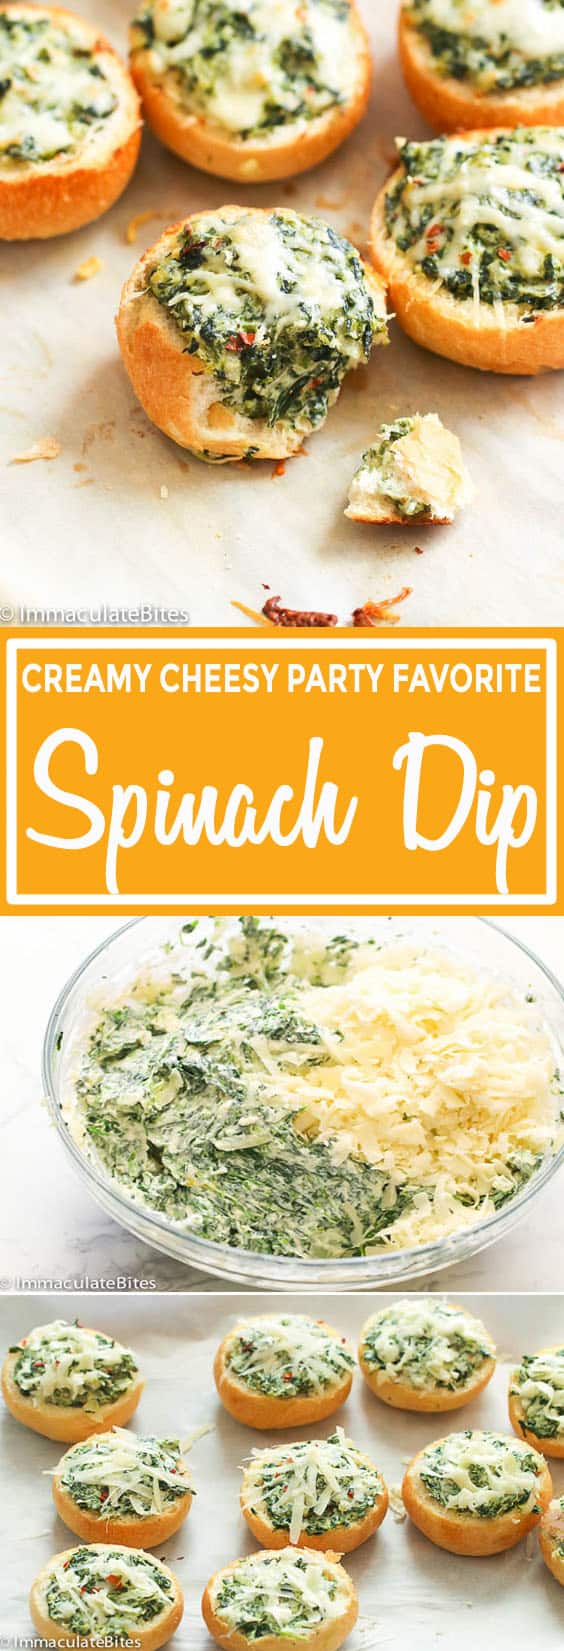 Spinach Dip - Immaculate Bites